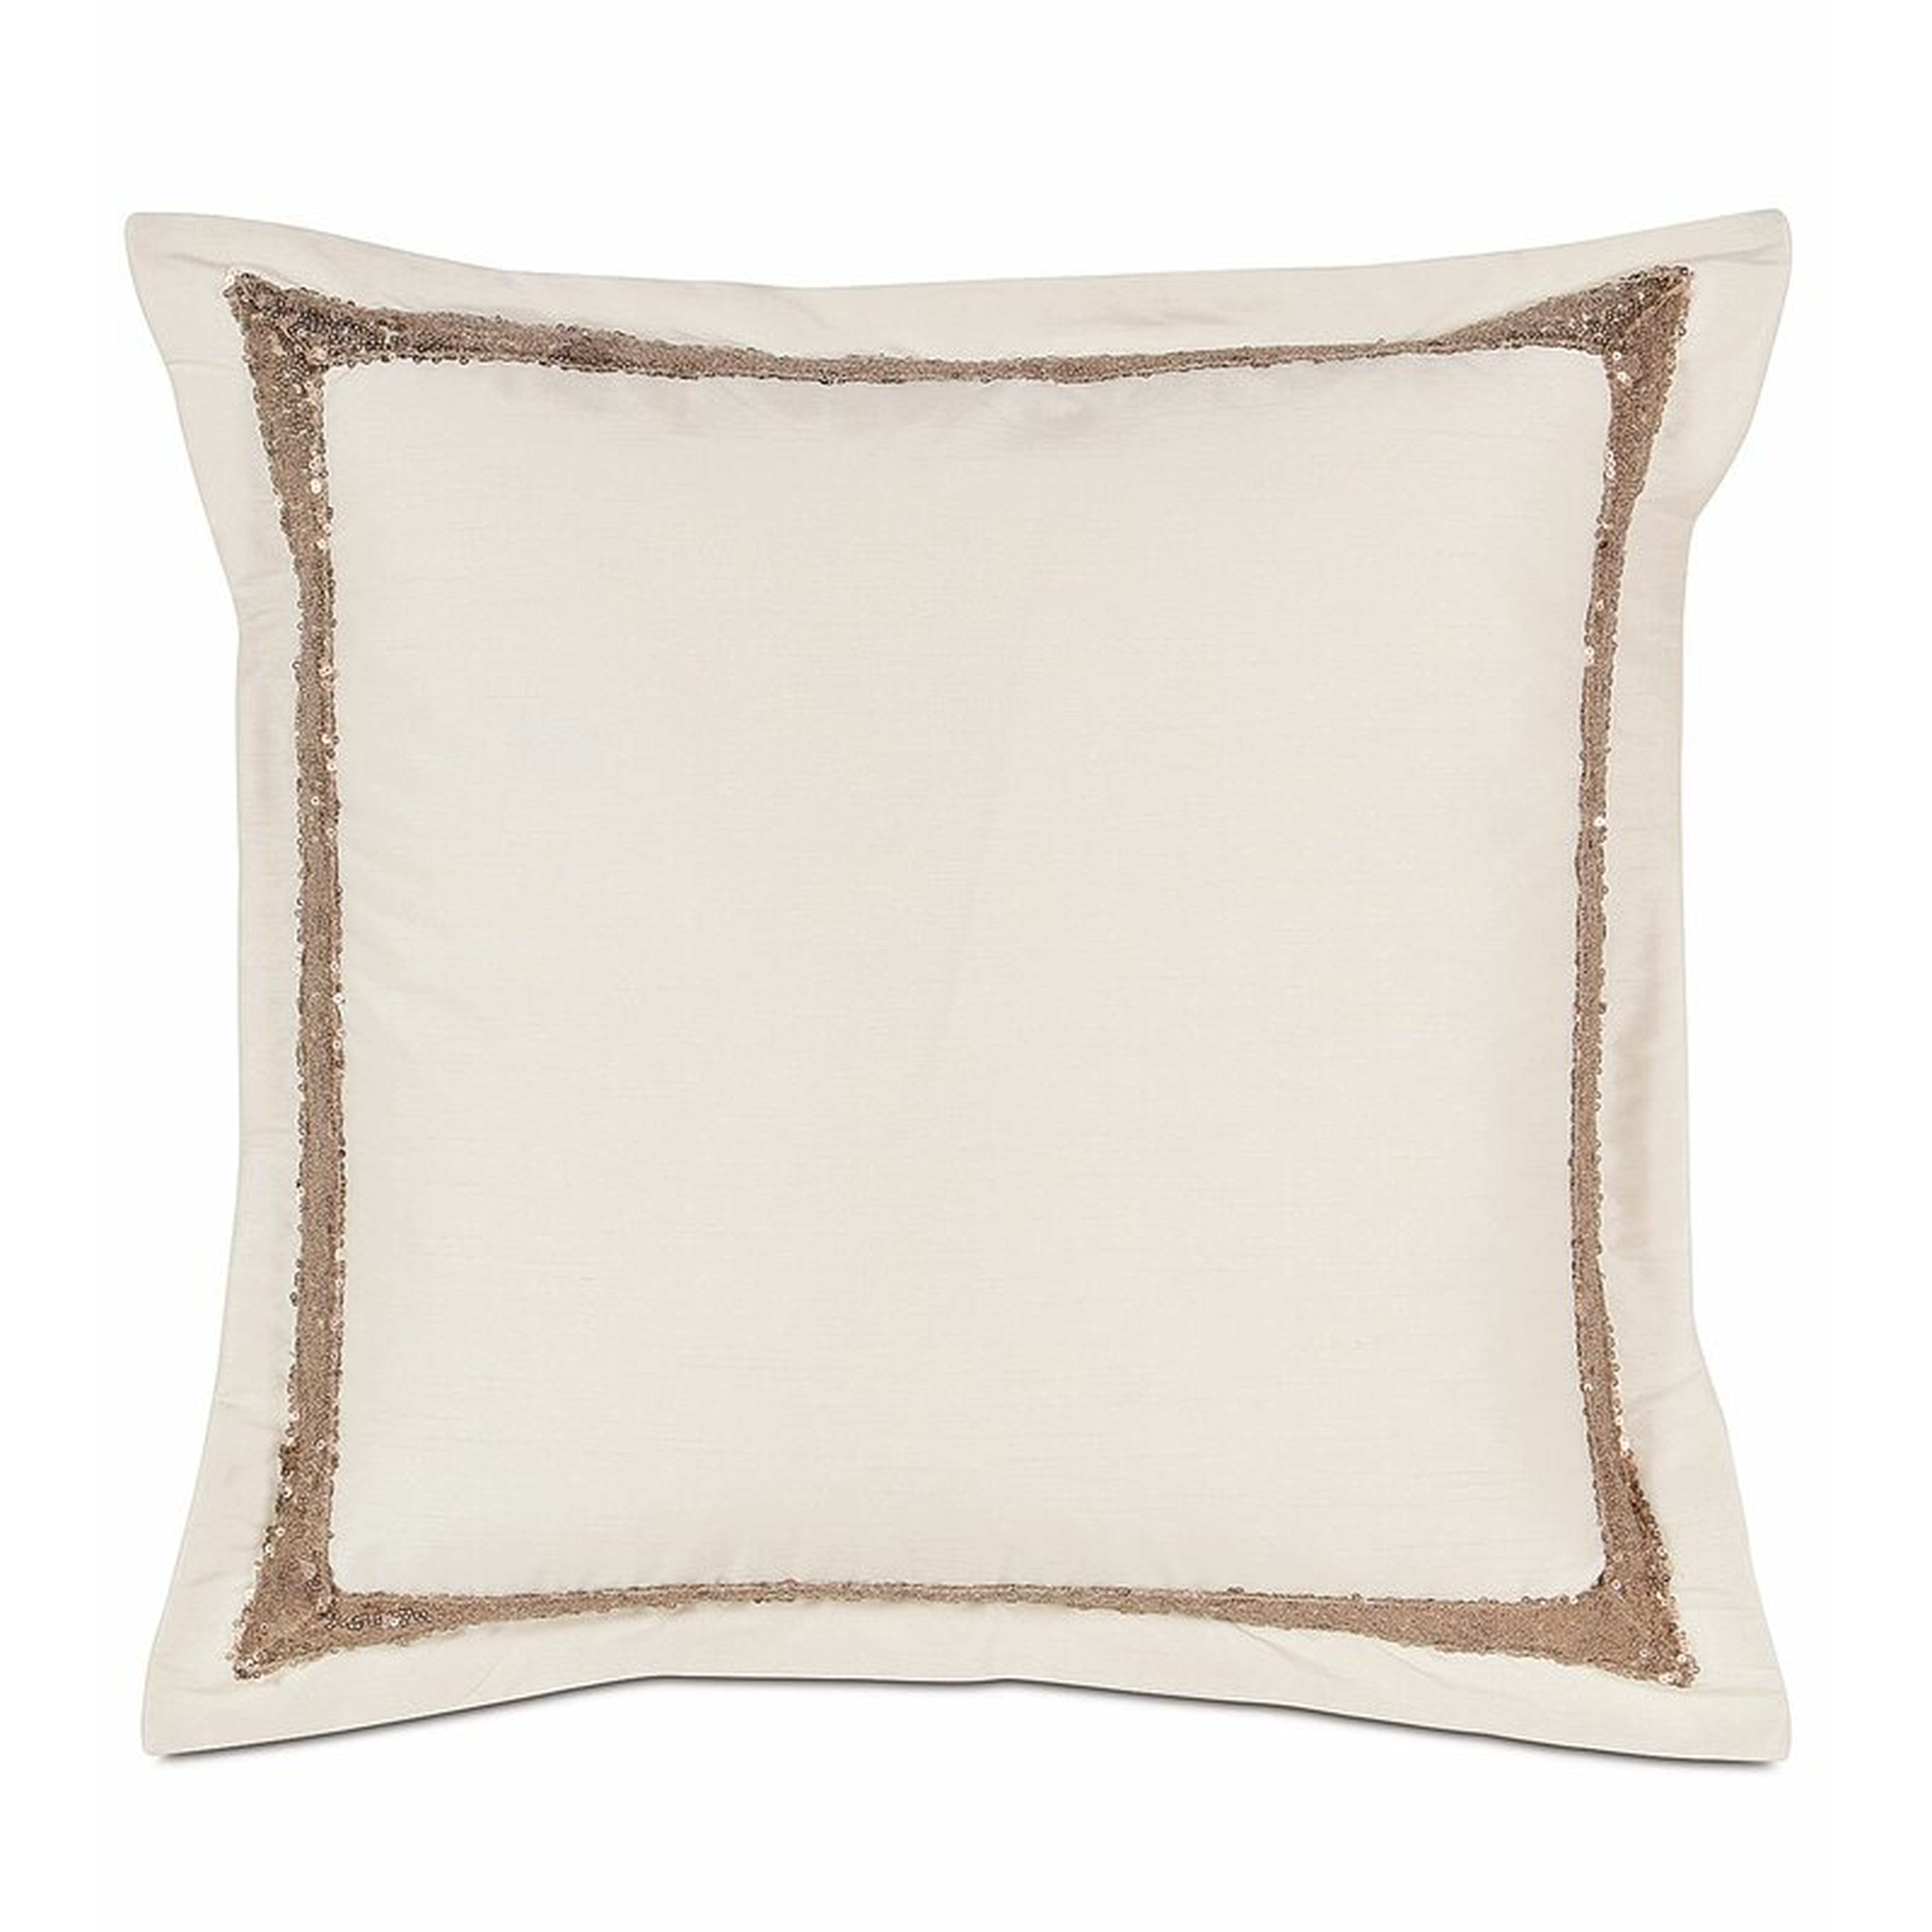 Eastern Accents Halo Sequin Border Throw Pillow Cover & Insert - Perigold